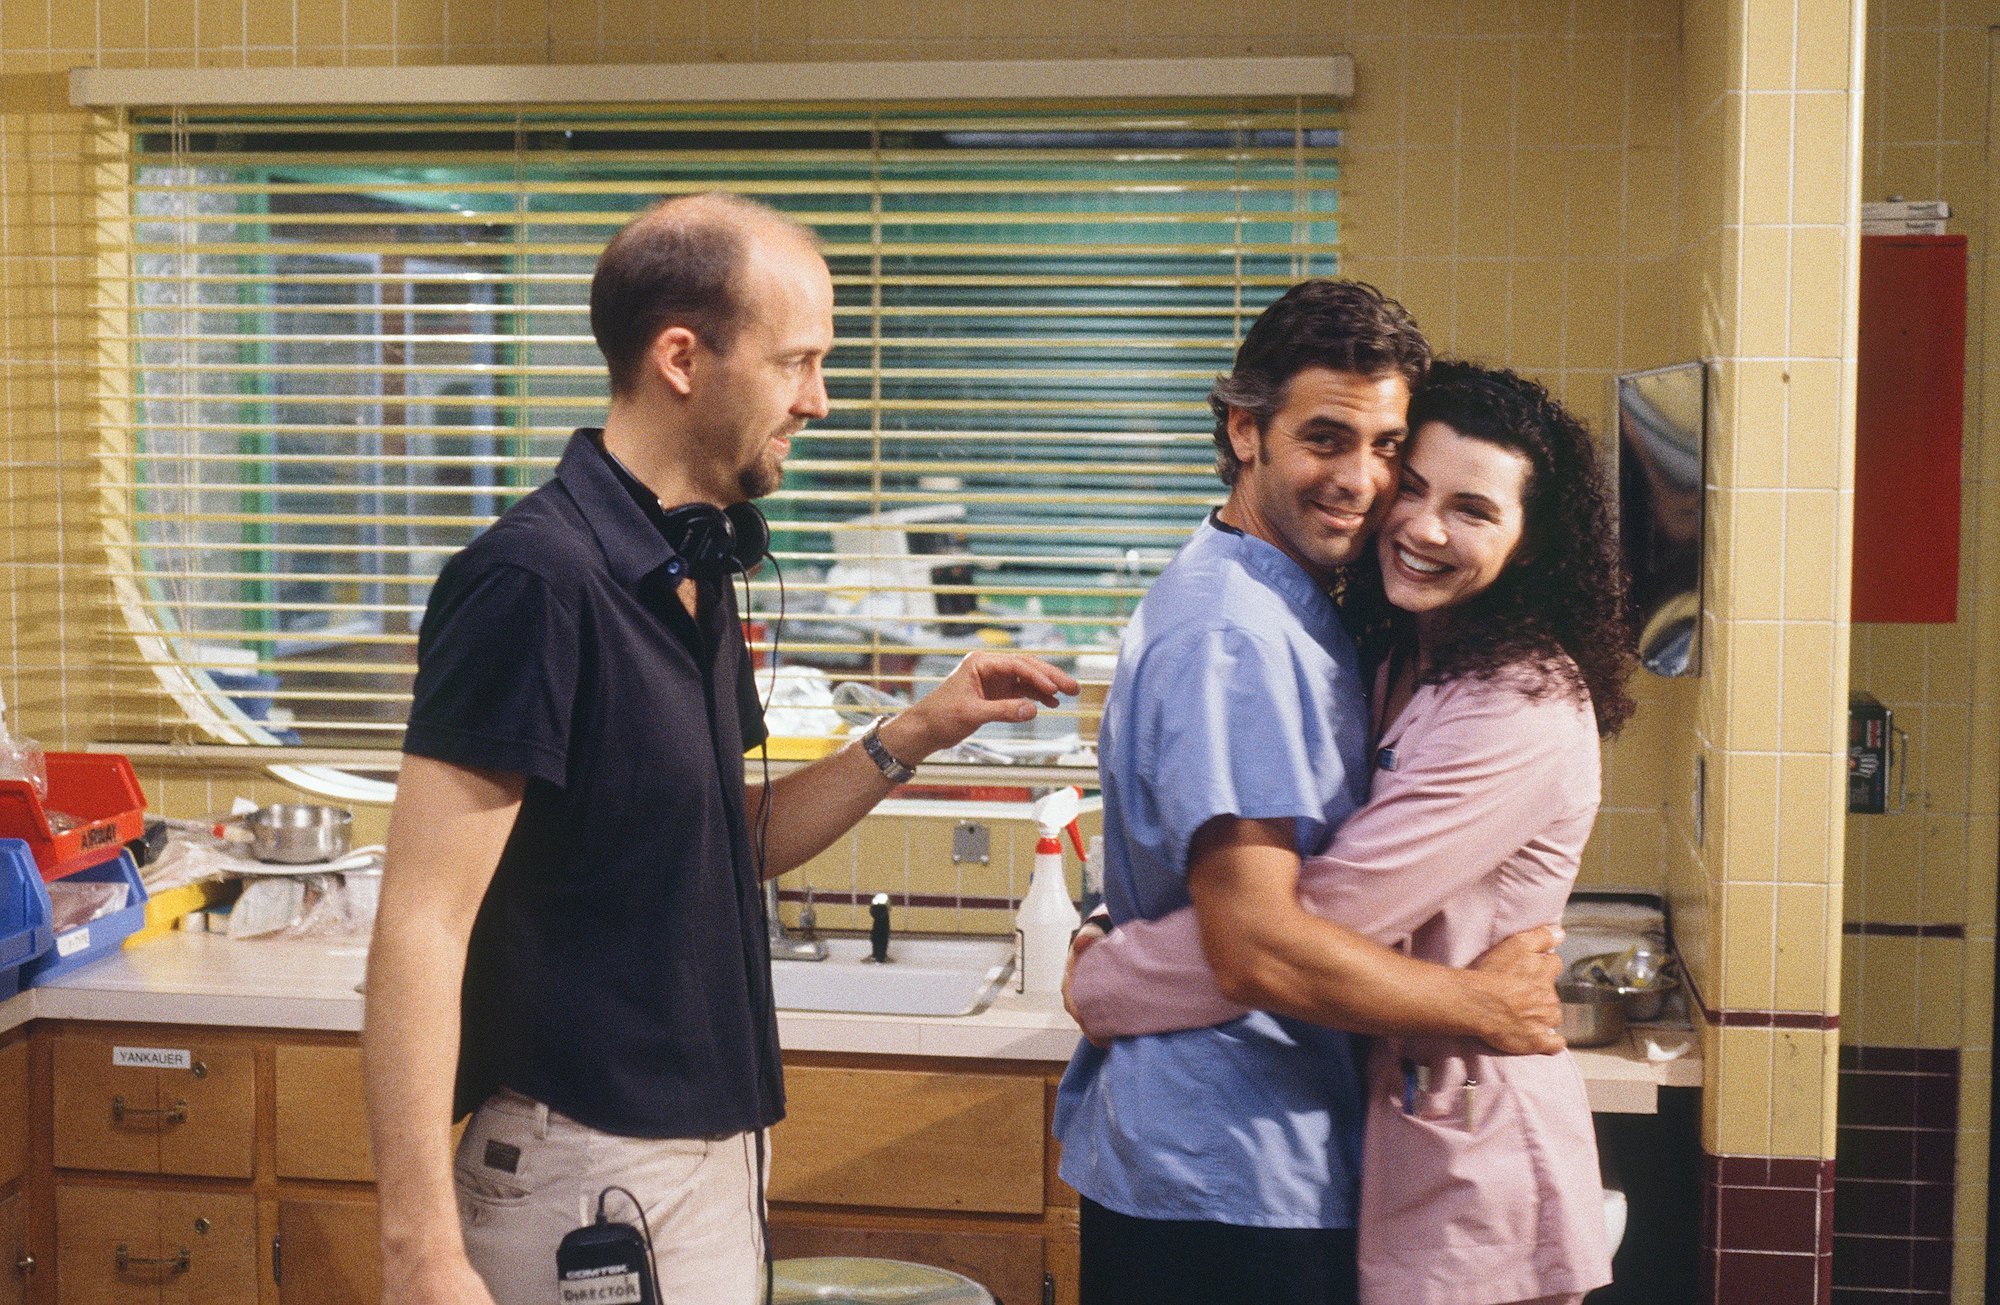 Anthony Edwards, George Clooney as Doctor Doug Ross, Julianna Margulies as Nurse Carol Hathaway 